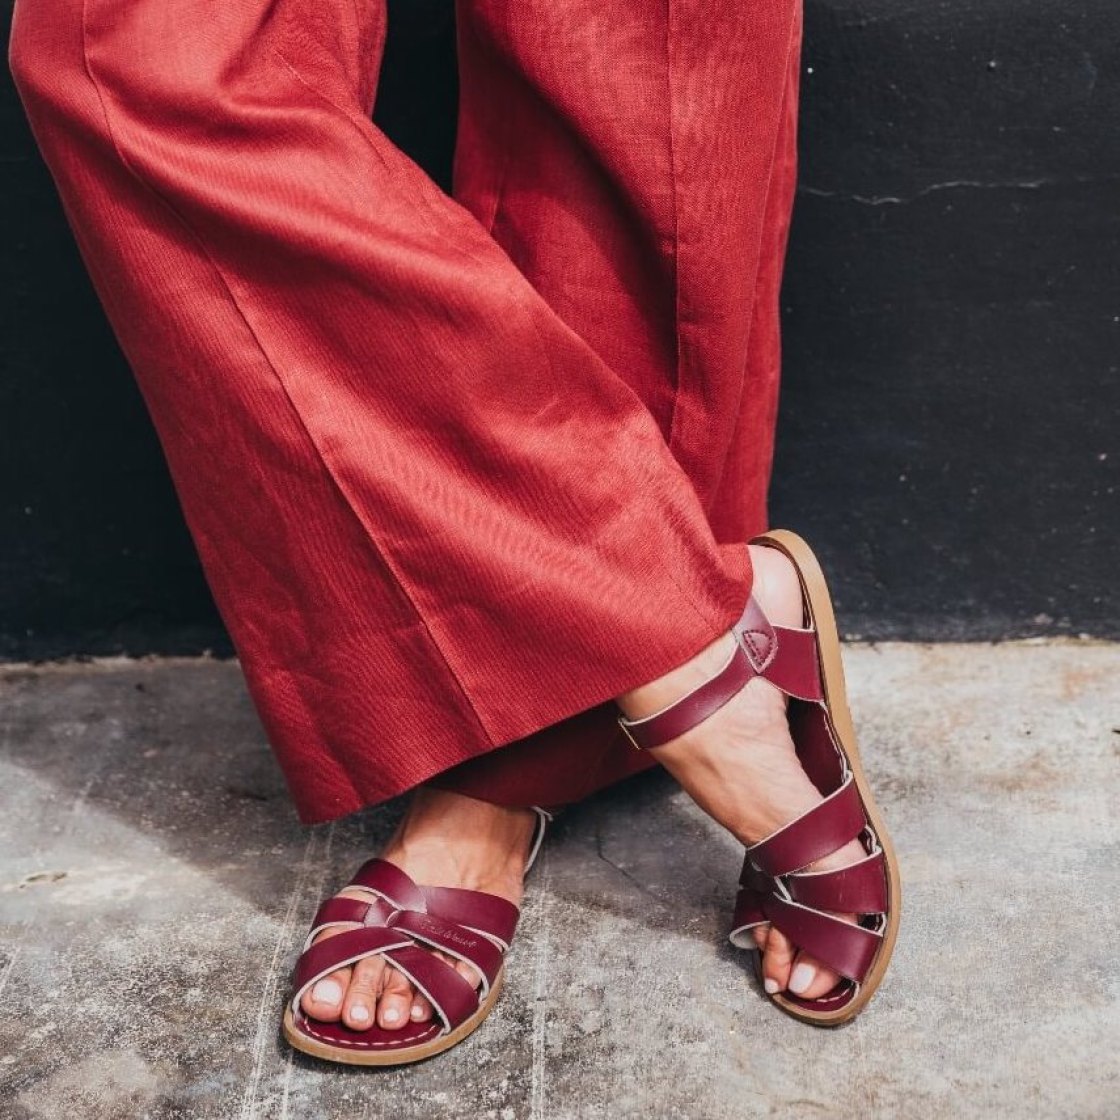 Are sandals appropriate for work?